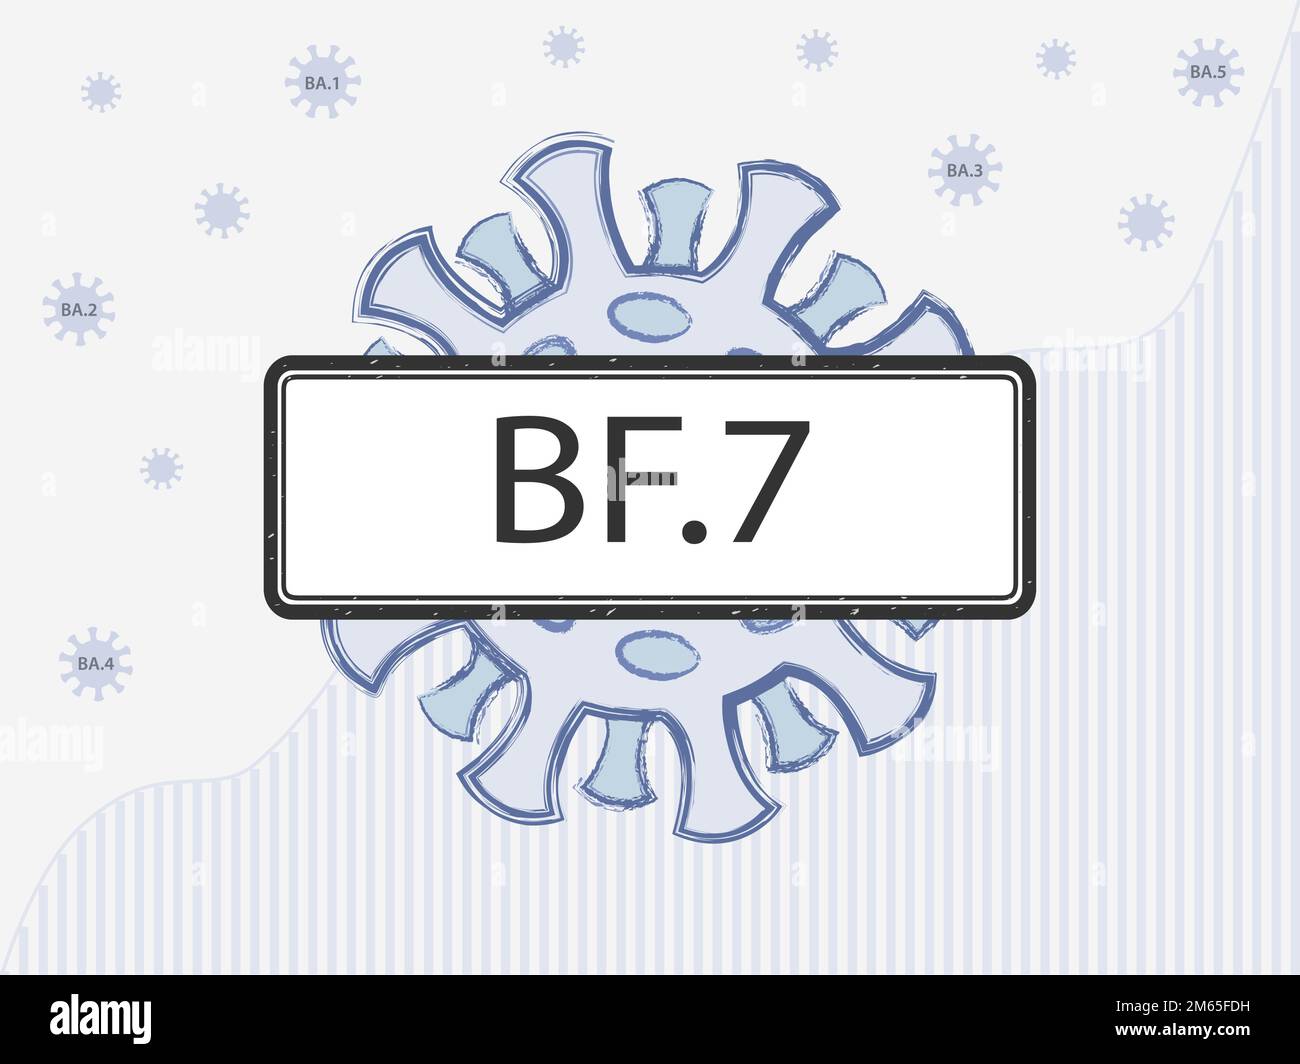 BF.7 in the sign. Coronovirus with spike proteins of a different color symbolizing mutations. BA.5 sub-variant.Nickname: Minotaur. Stock Vector